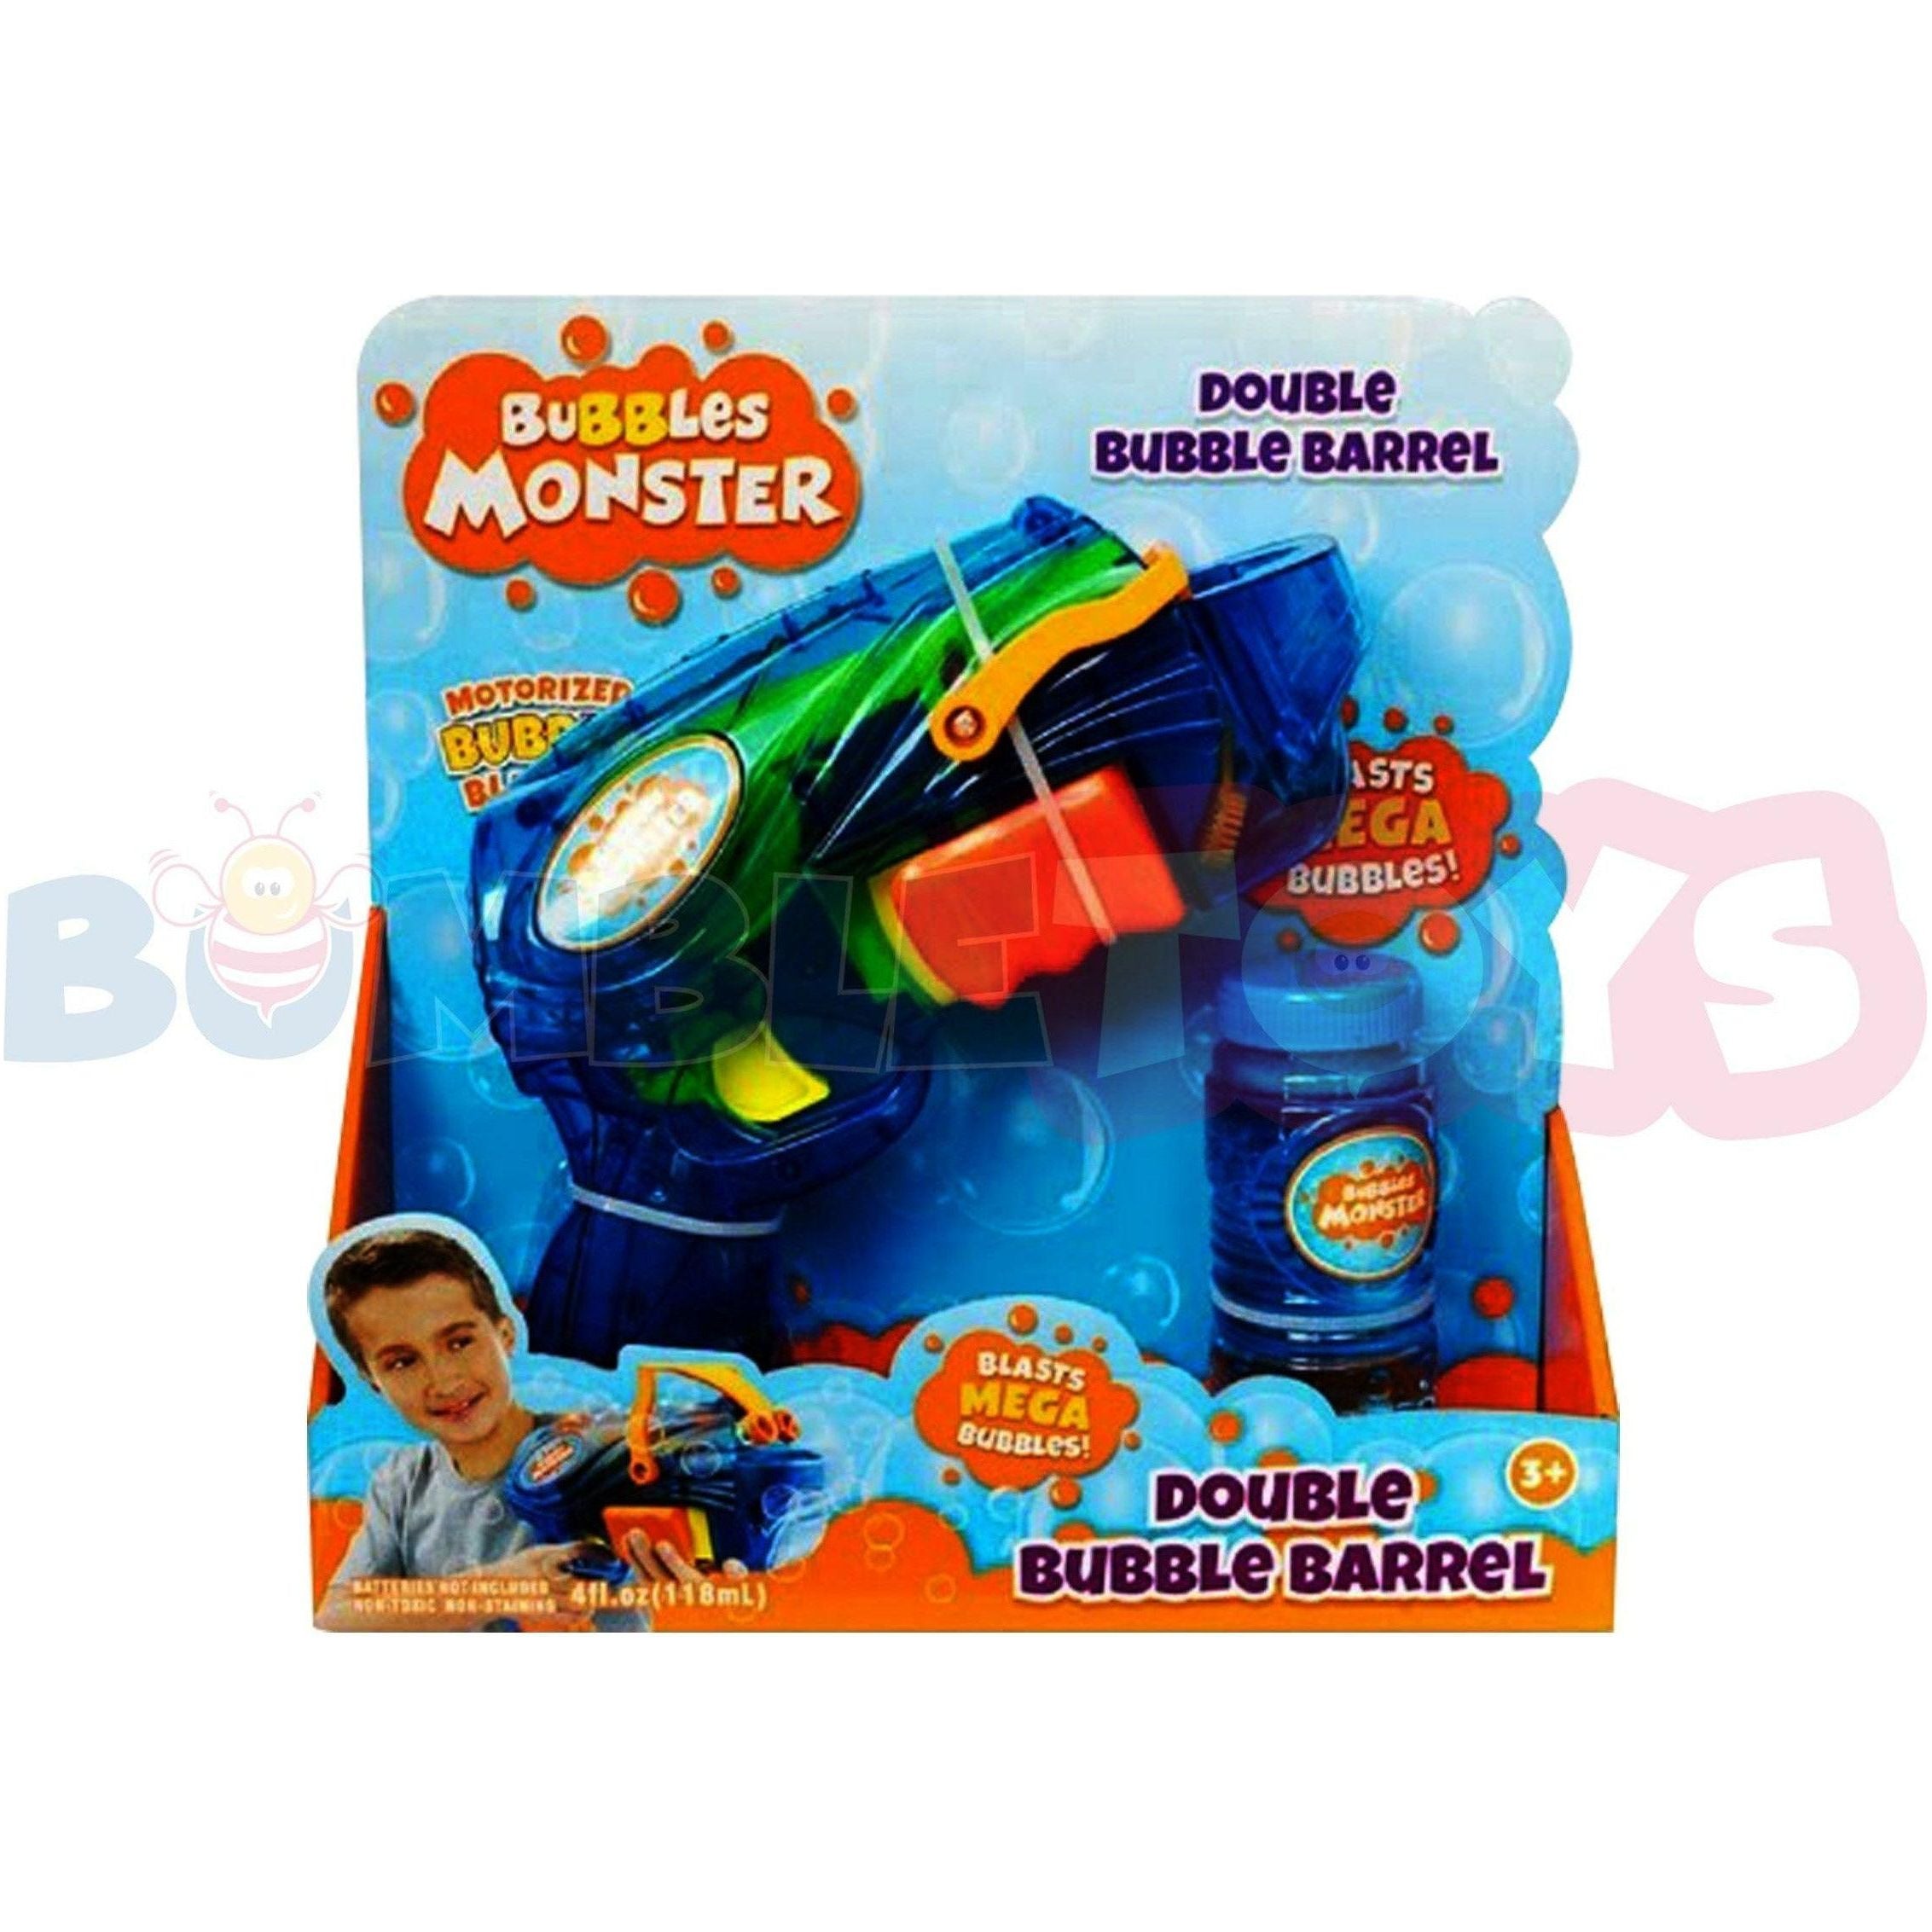 Double Bubble Barrel Monster Bubbles Gun - BumbleToys - 5-7 Years, Blasters & Water Pistols, Boys, Girls, Toy House